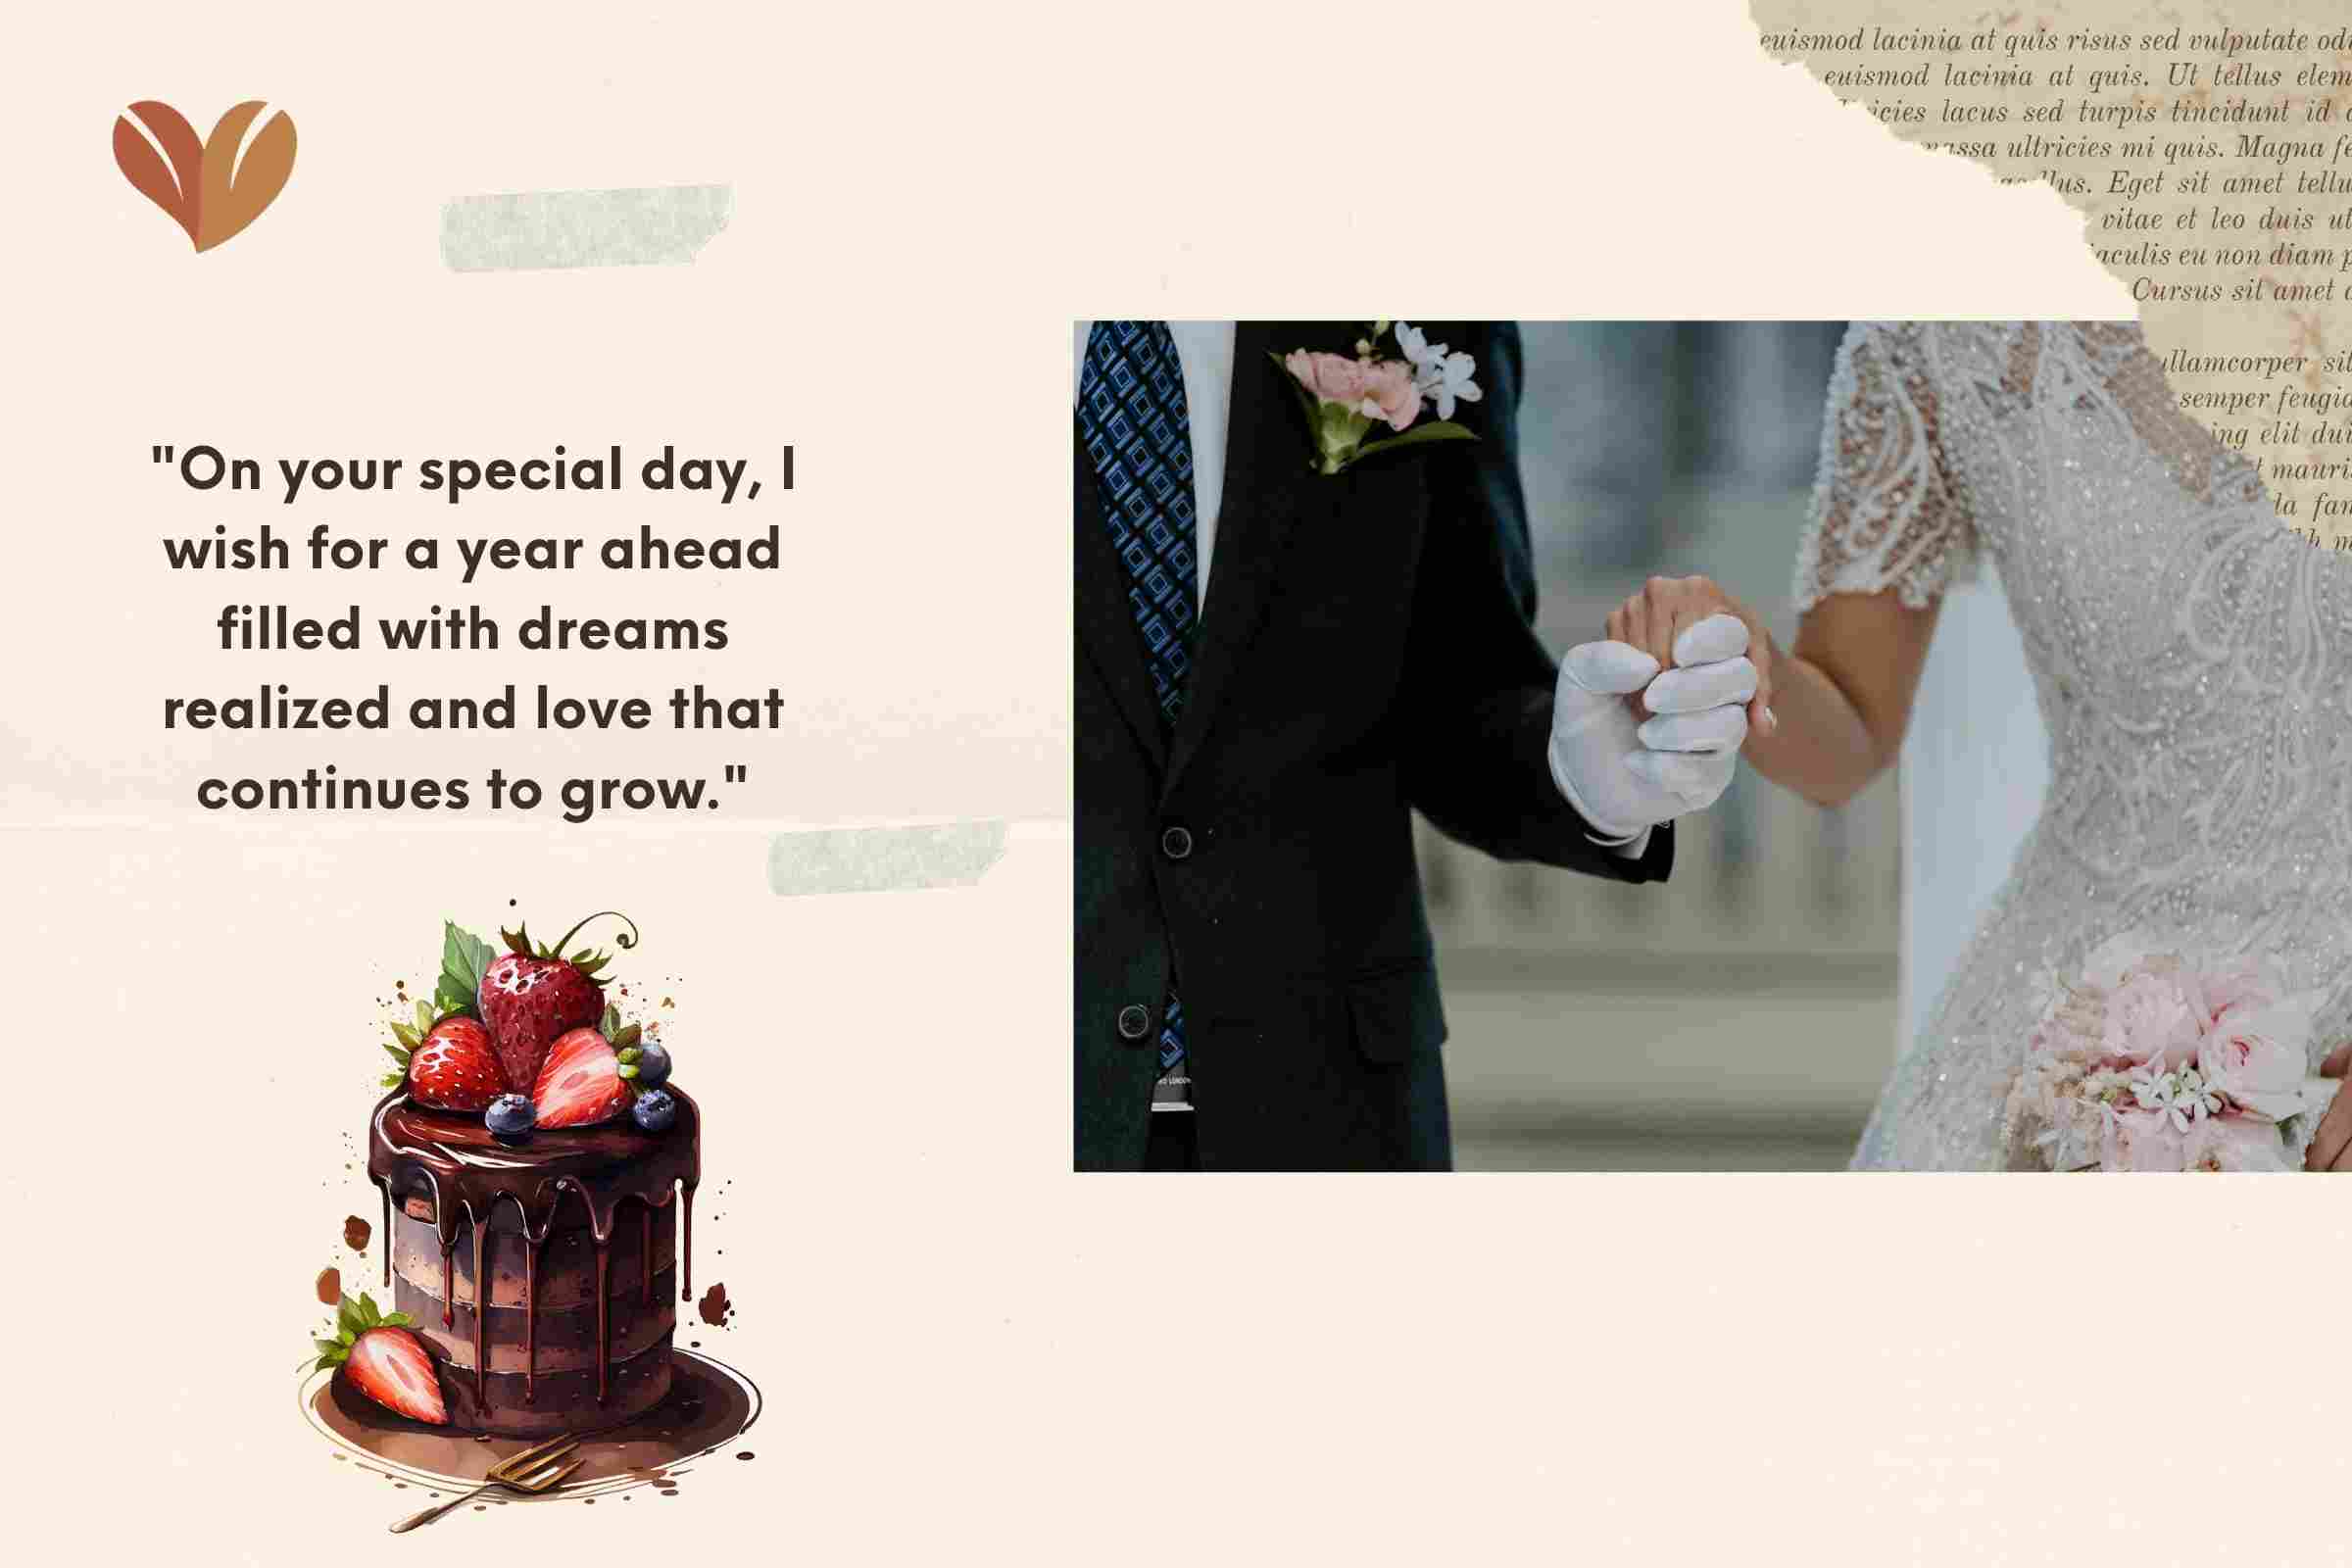 "On your special day, I wish for a year ahead filled with dreams realized and love that continues to grow."